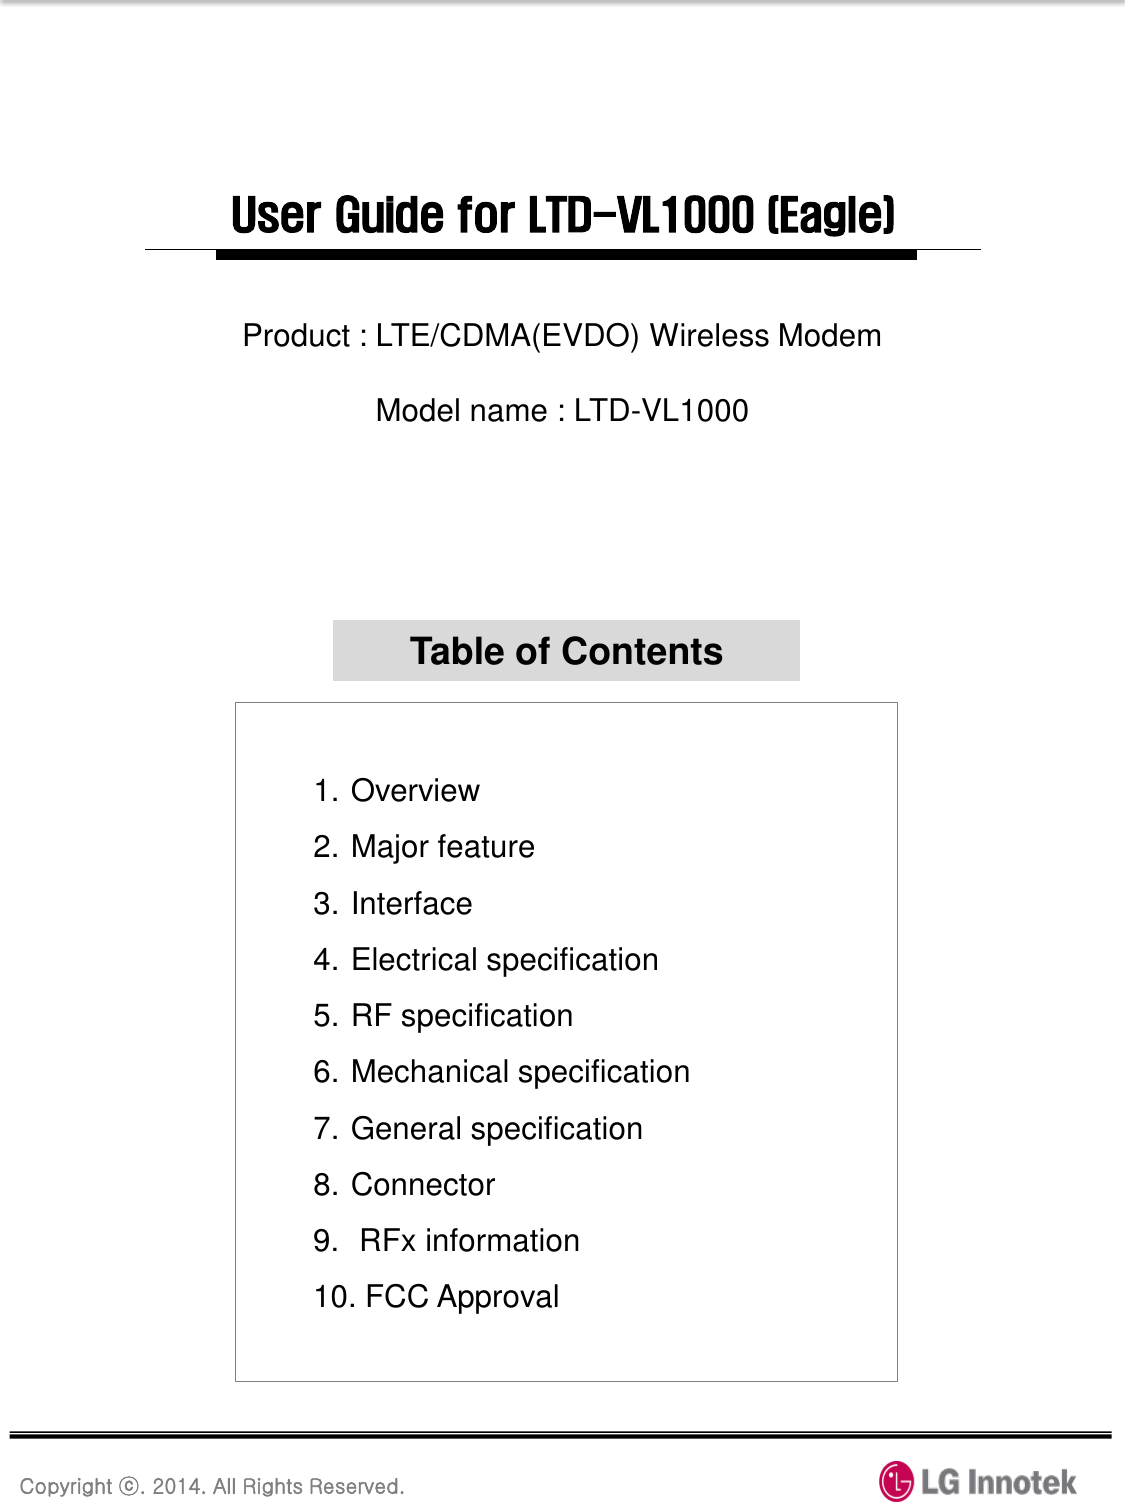 Copyright ⓒ. 2014. All Rights Reserved. User Guide for LTD-VL1000 (Eagle) 1. Overview 2. Major feature 3. Interface 4. Electrical specification 5. RF specification 6. Mechanical specification 7. General specification 8. Connector 9.  RFx information 10. FCC Approval Table of Contents Product : LTE/CDMA(EVDO) Wireless Modem  Model name : LTD-VL1000 